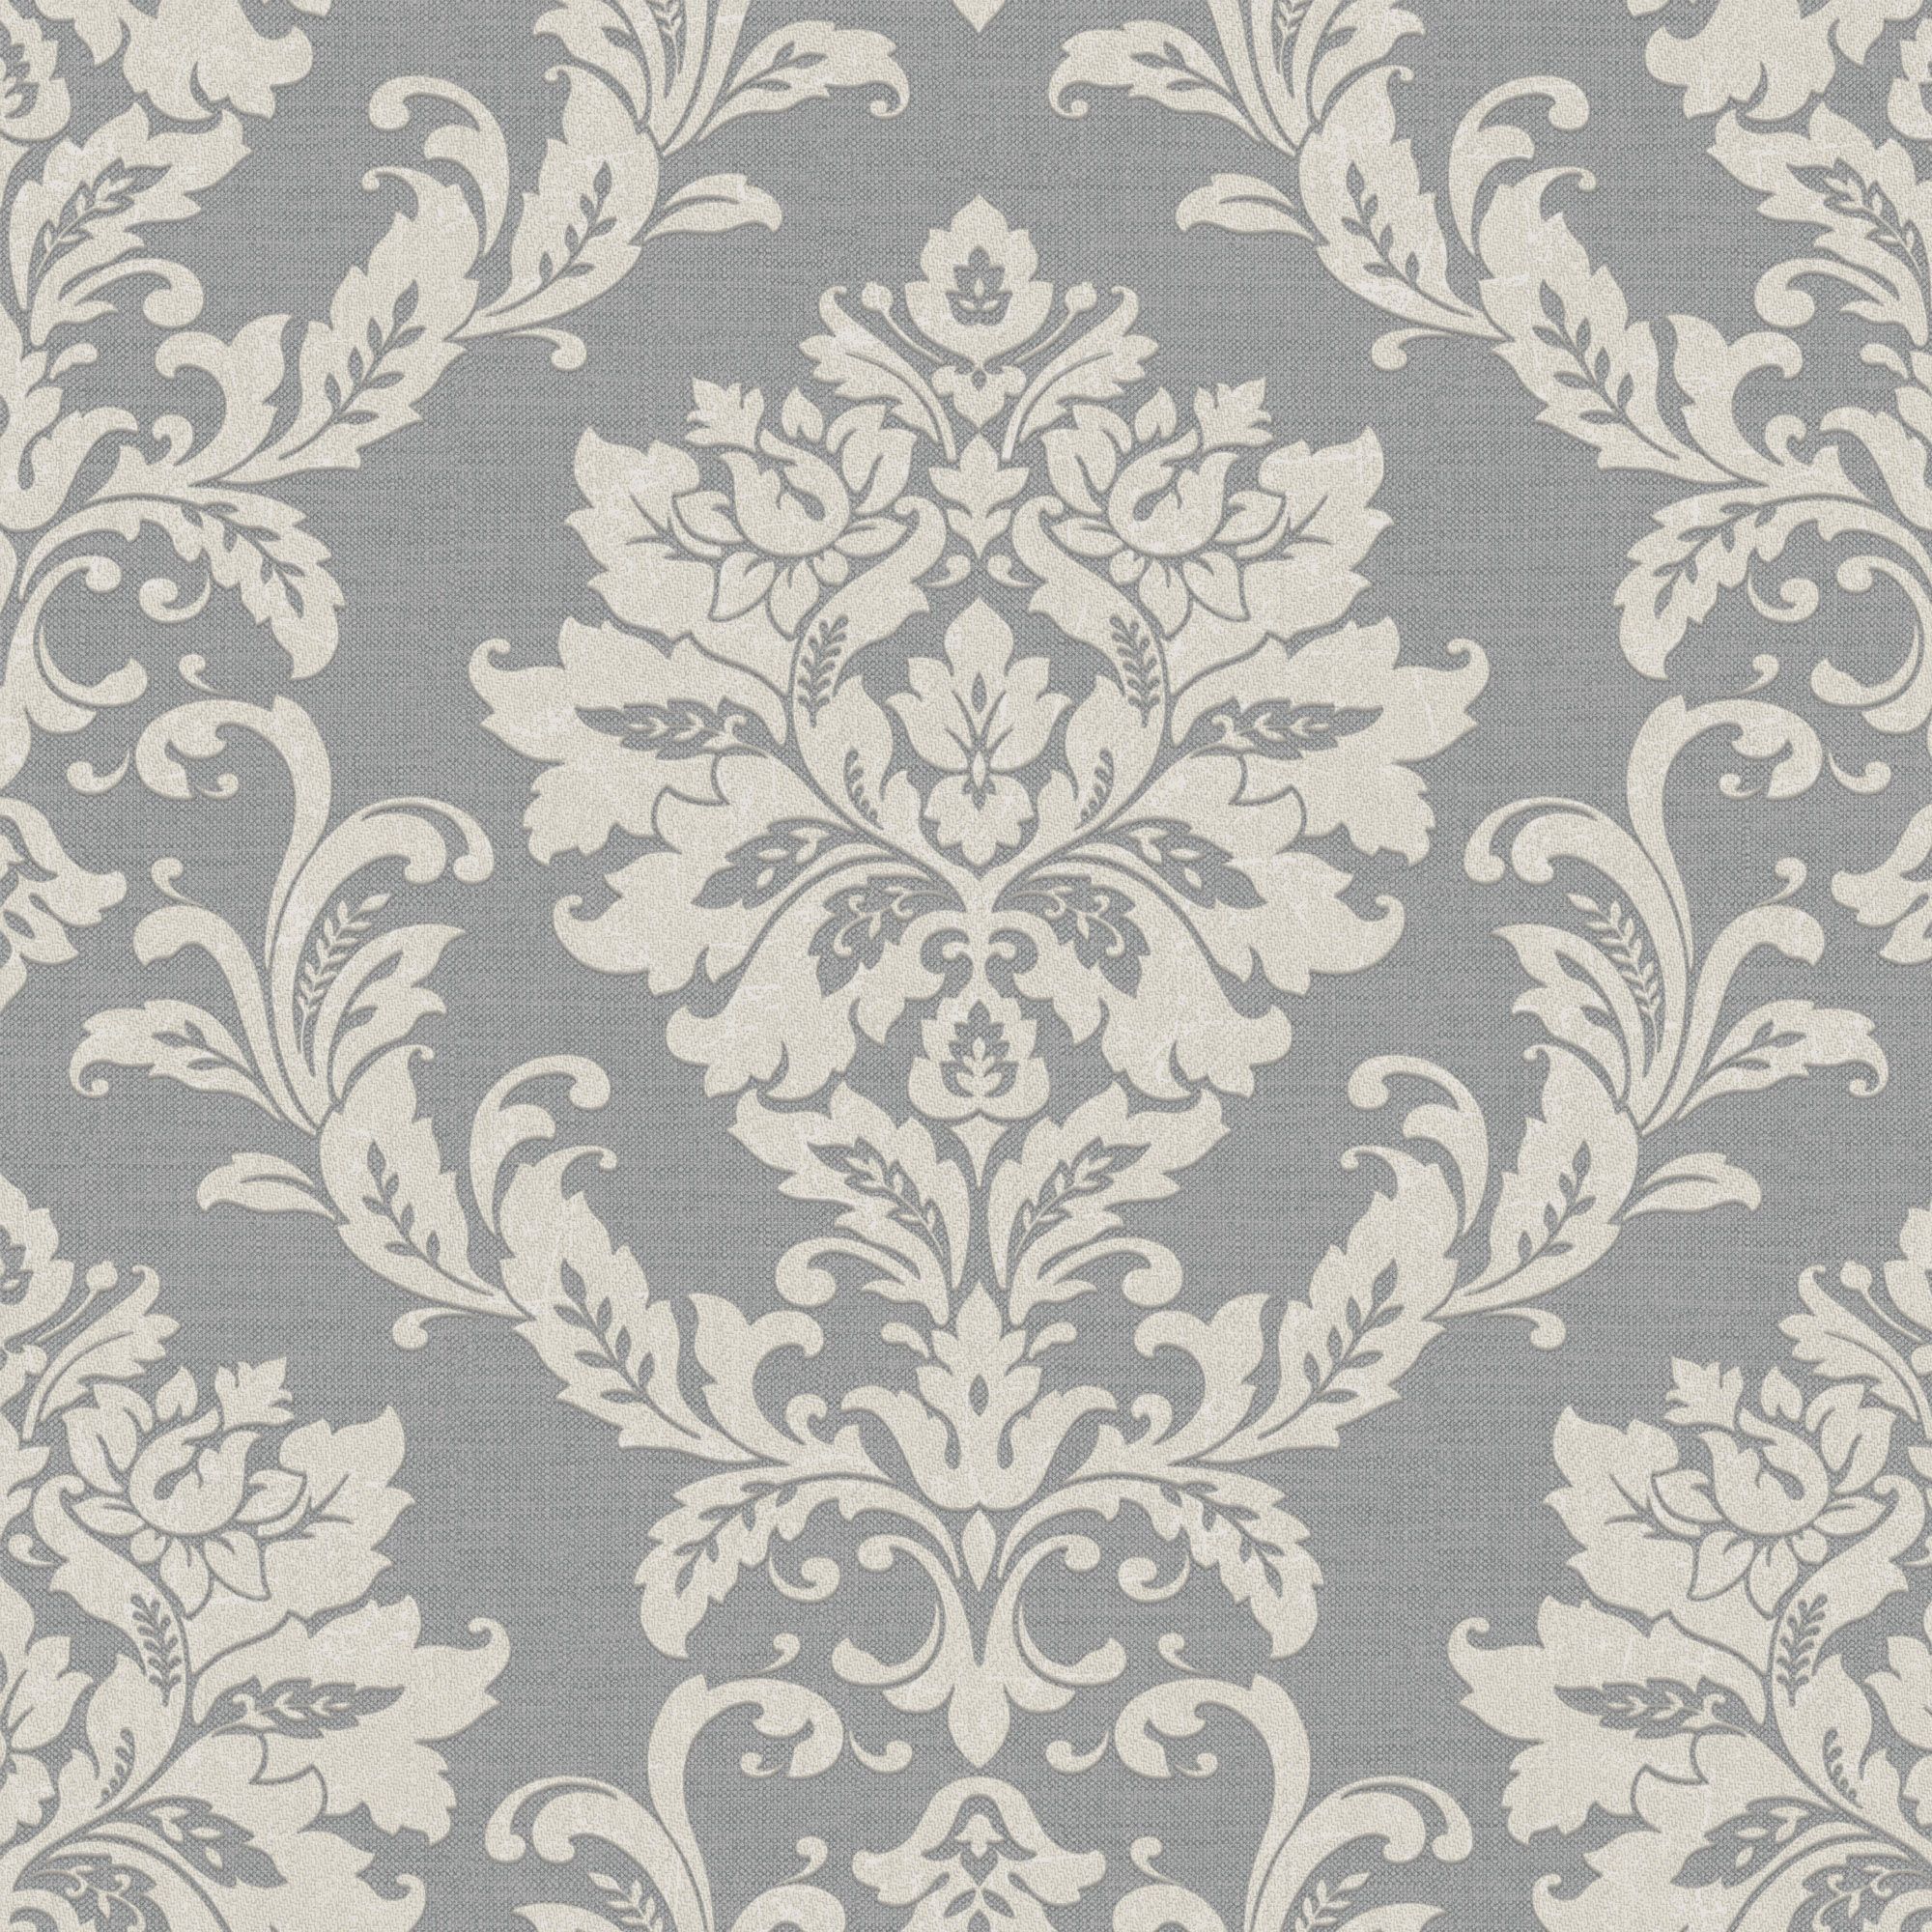 GoodHome Mire Grey Woven effect Damask Textured Wallpaper Sample